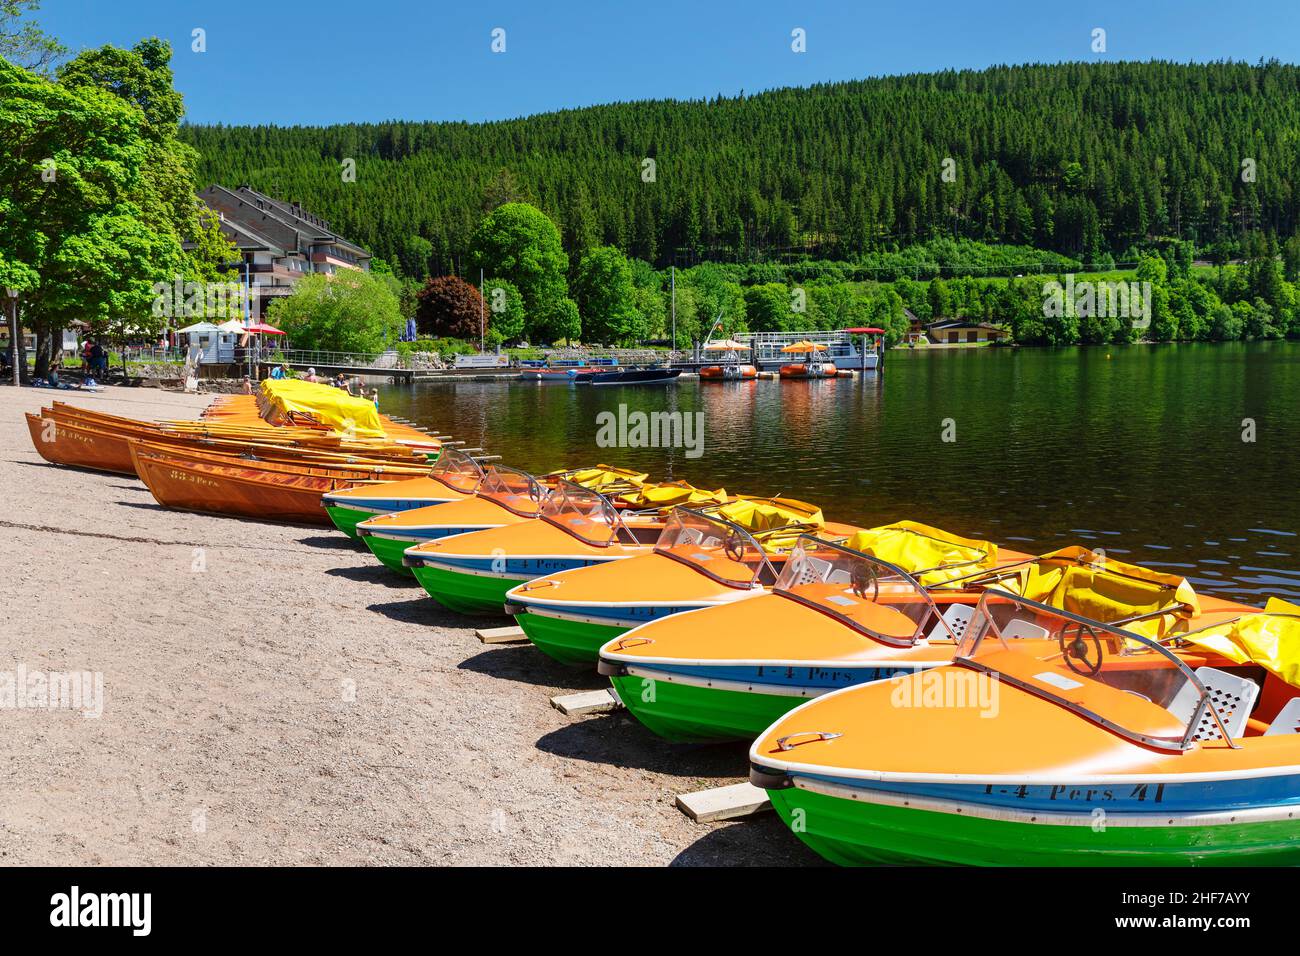 Barche a Titisee, Foresta Nera, Baden-Württemberg, Germania Foto Stock